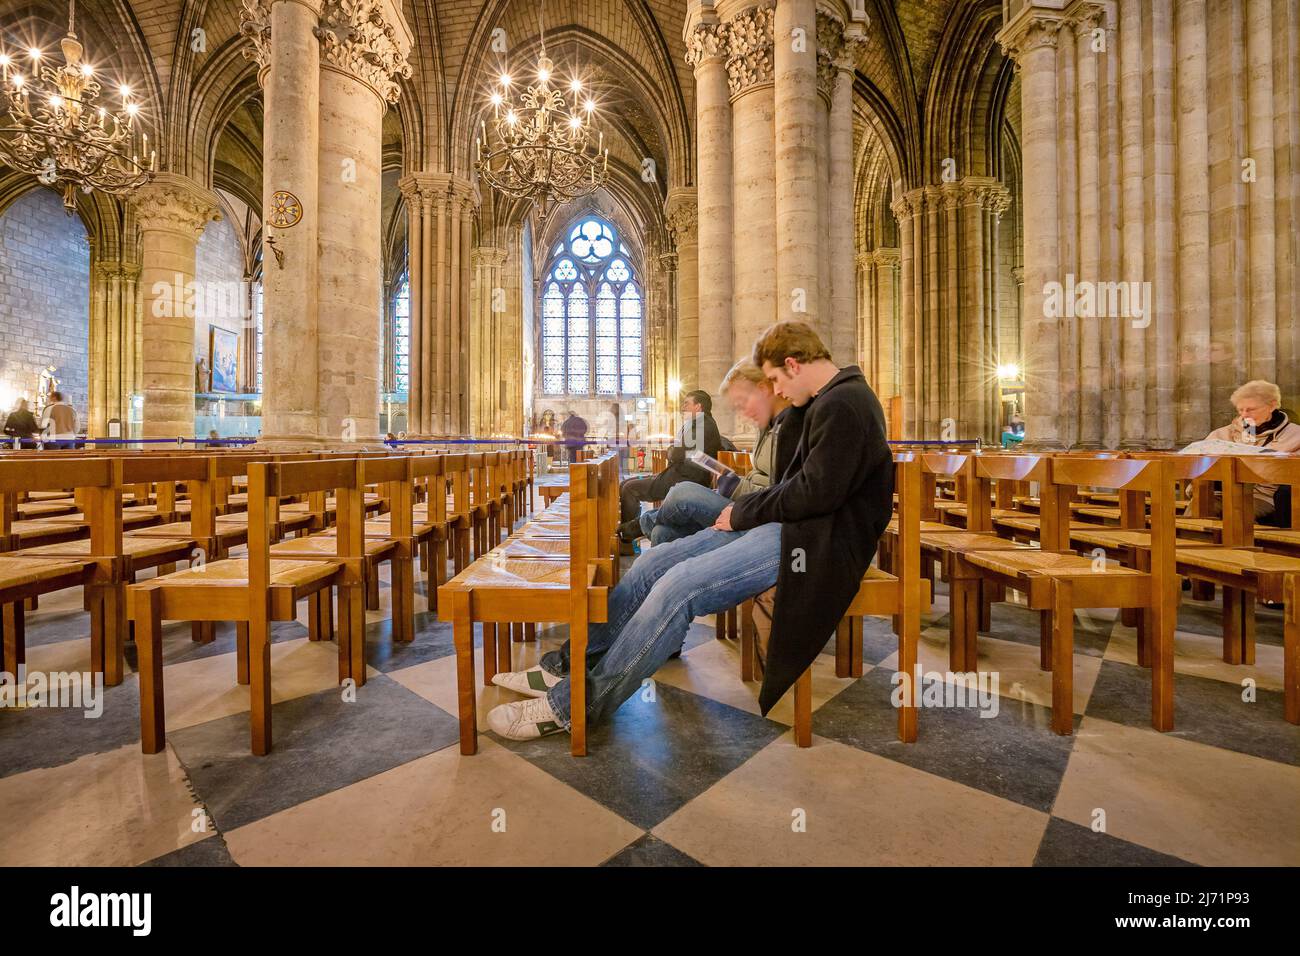 People sit inside the Notre Dame Cathedral in Paris France Stock Photo